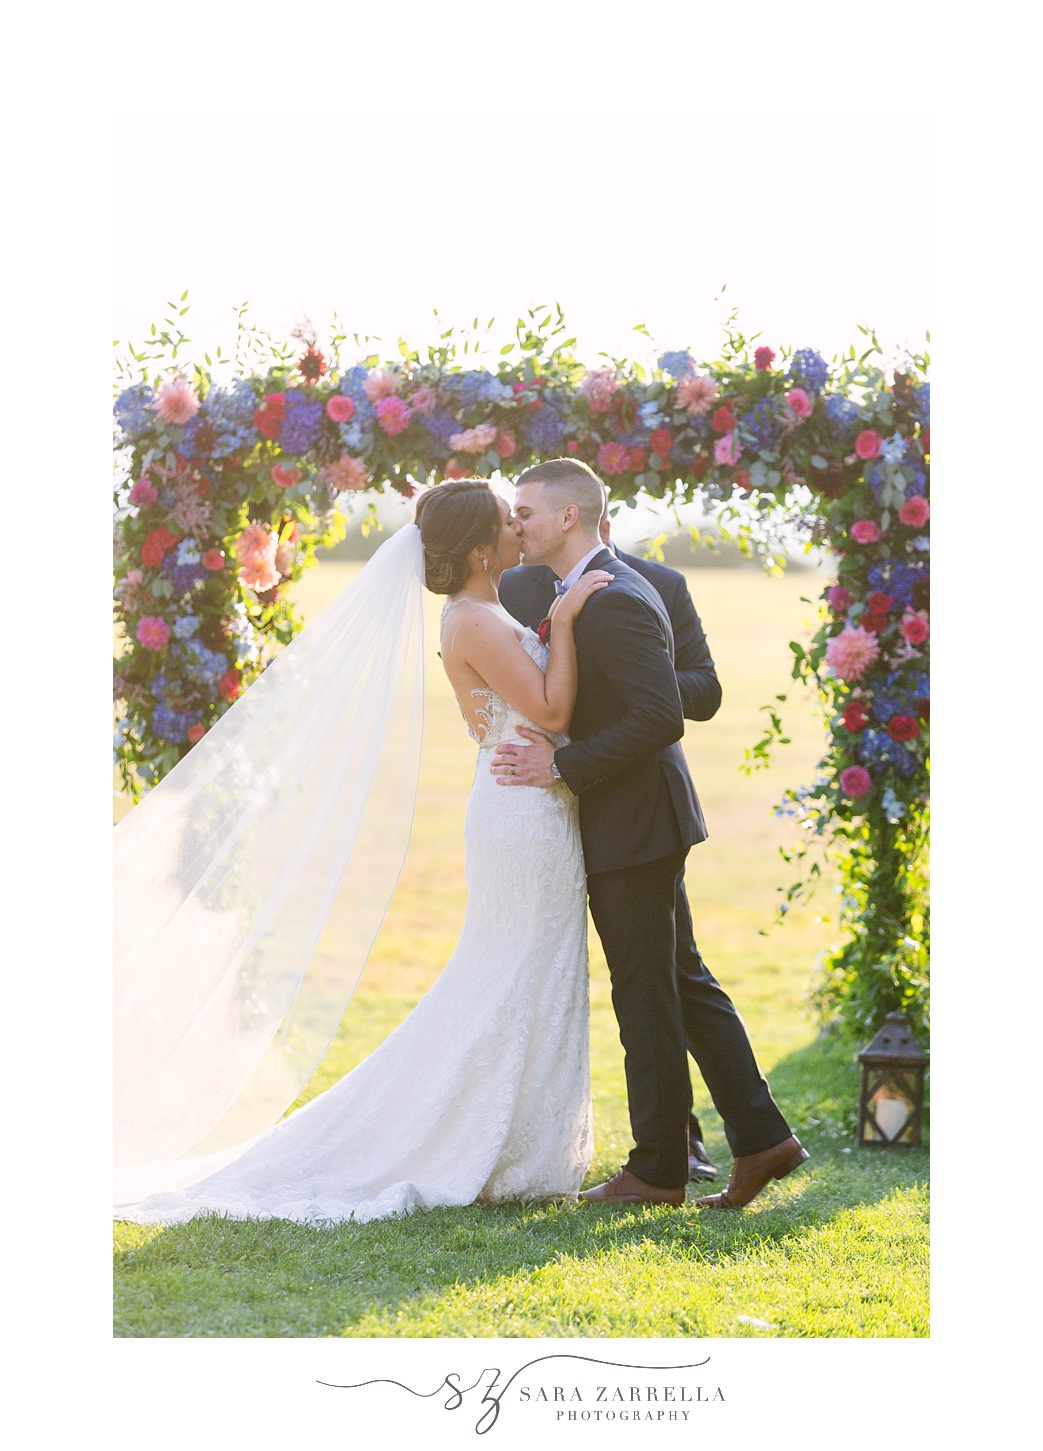 first kiss during Blithewold Mansion Wedding ceremony under floral arbor